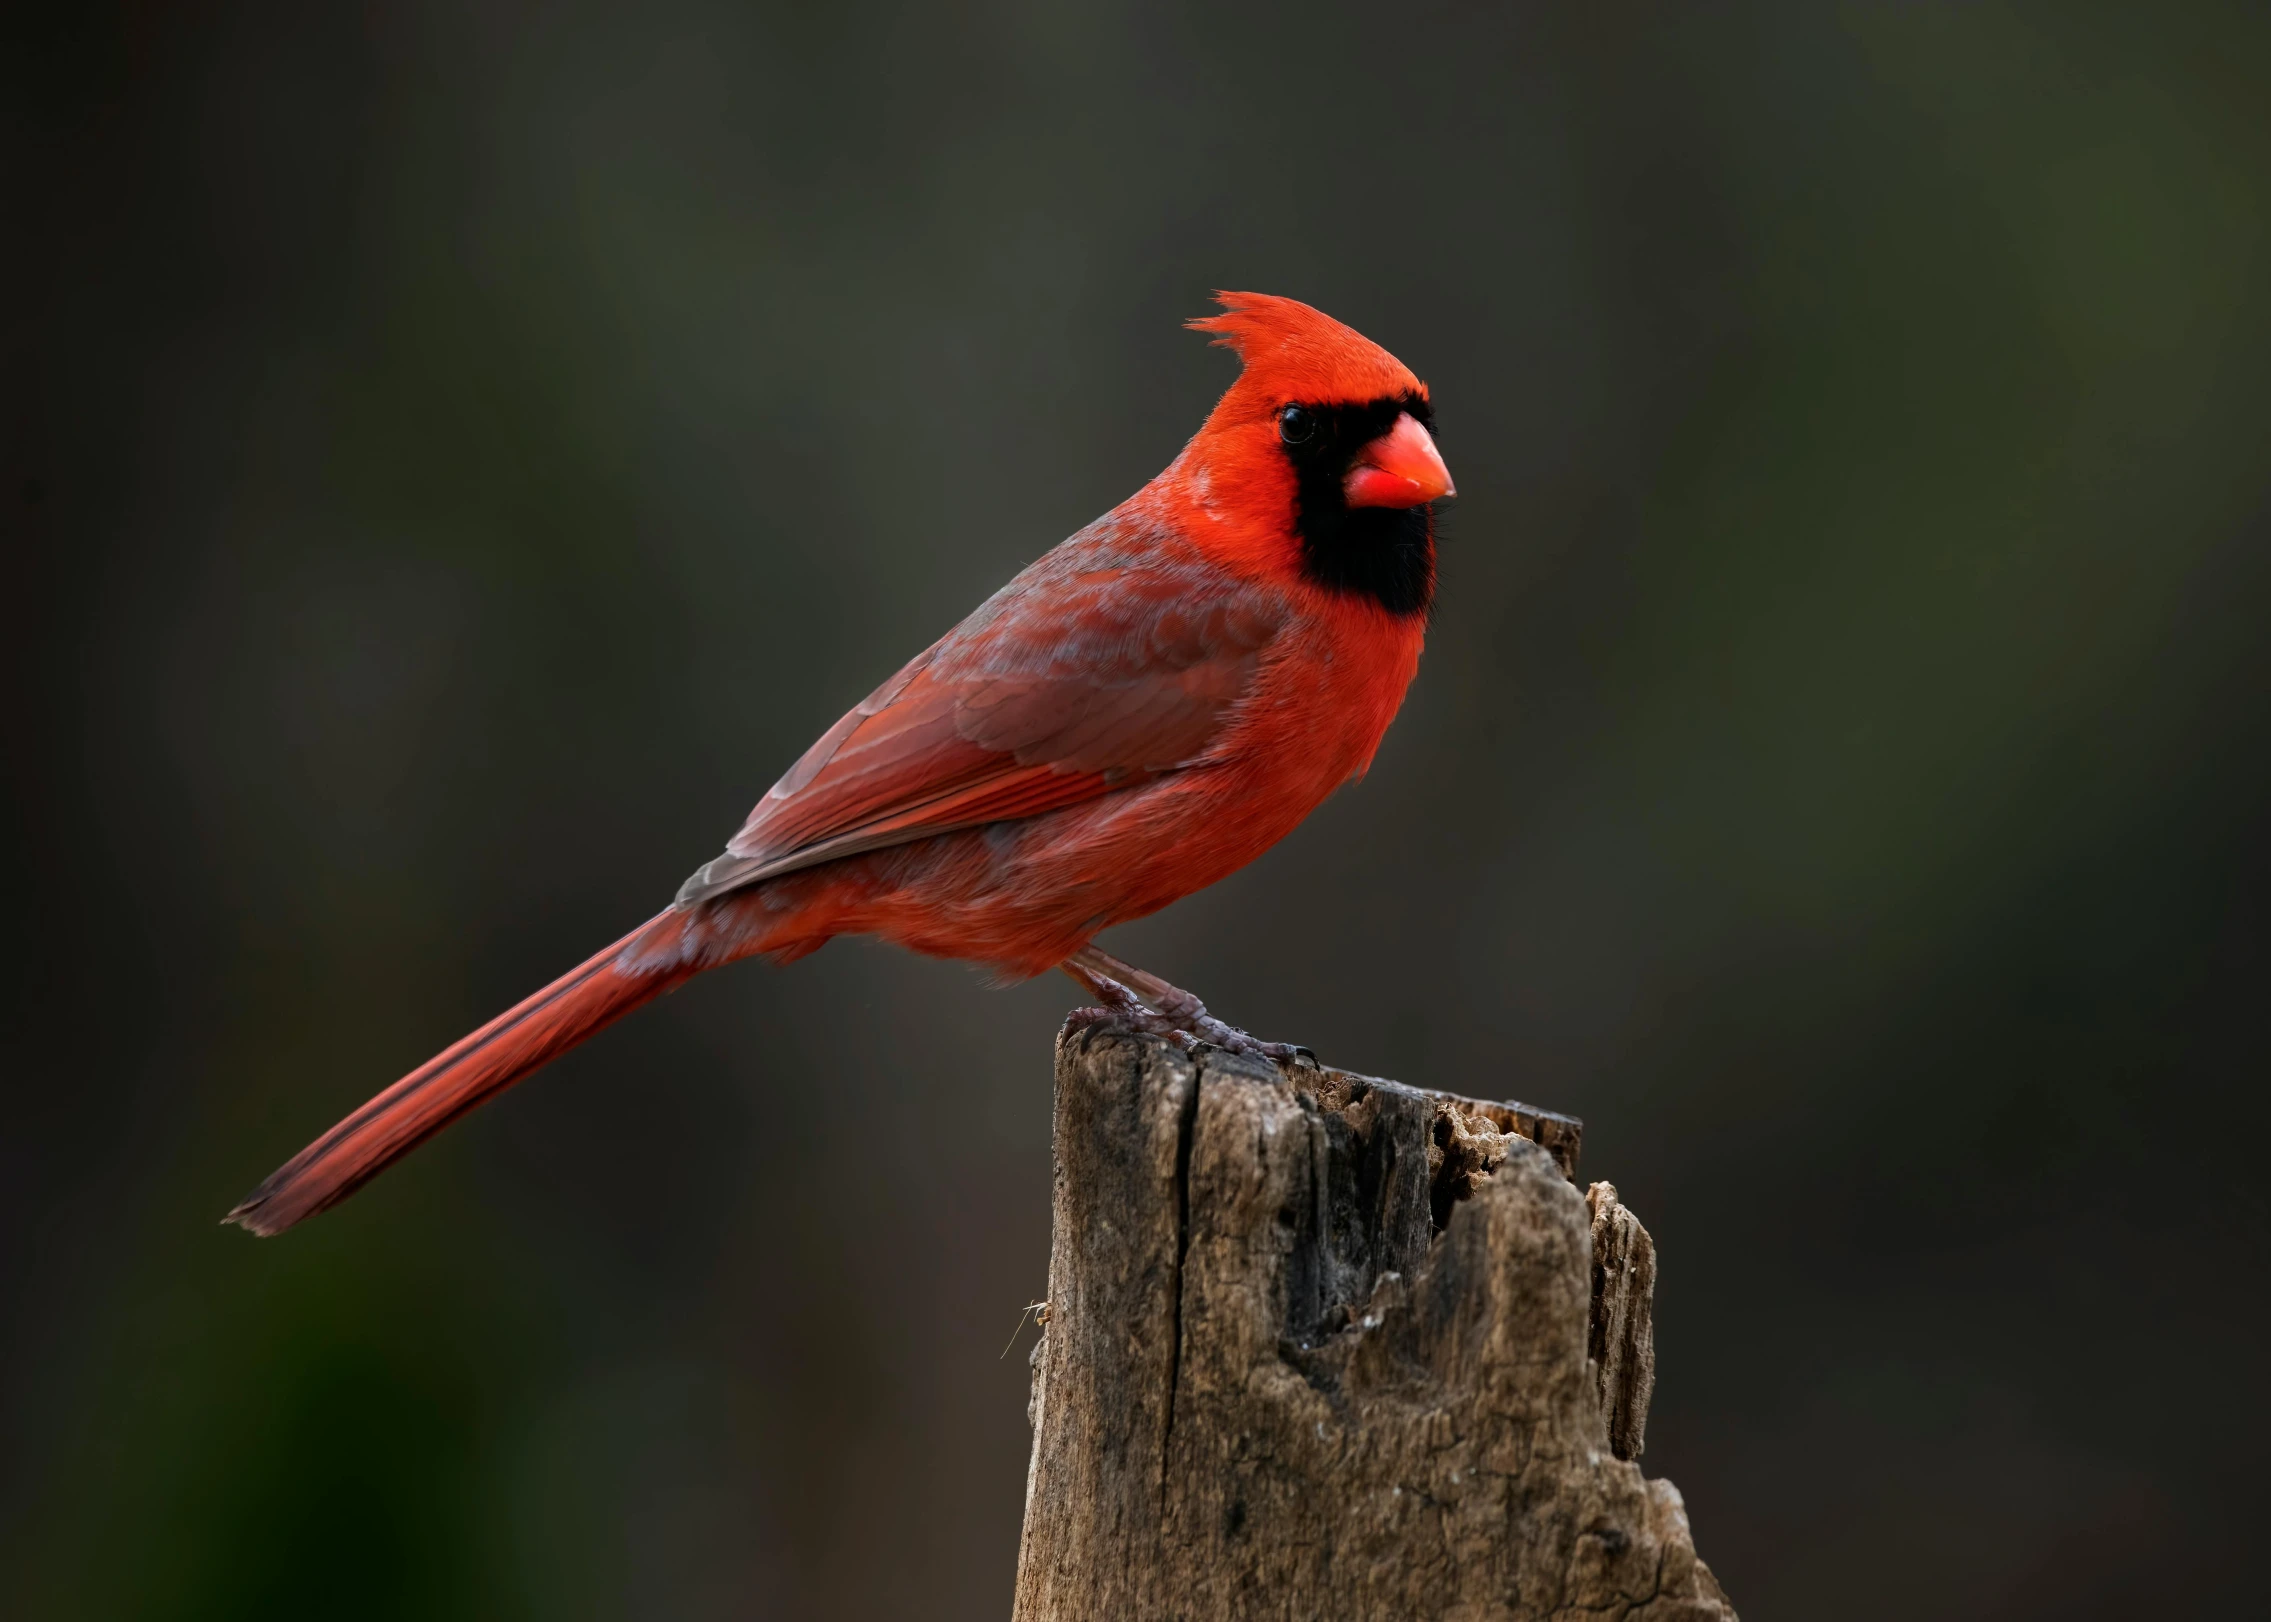 a cardinal stands on a post and looks alert